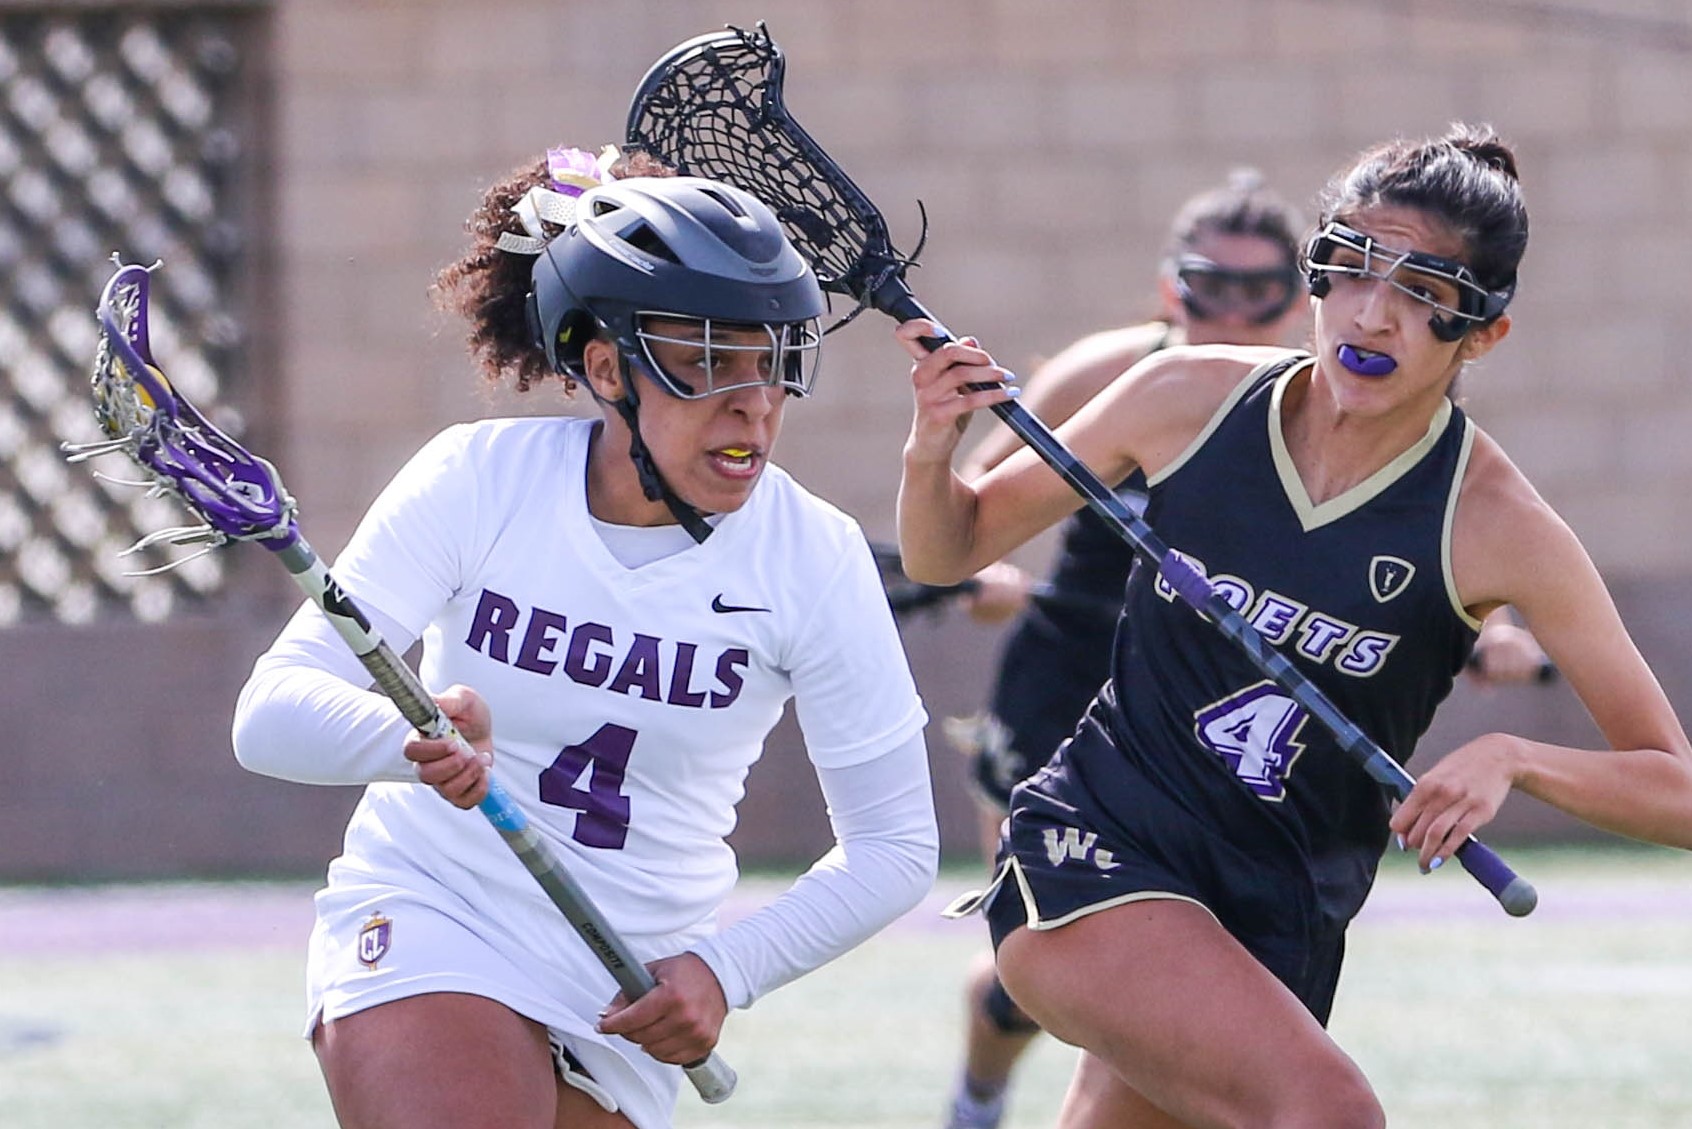 Regals Continue to Add First in 18-4 Loss to Chapman